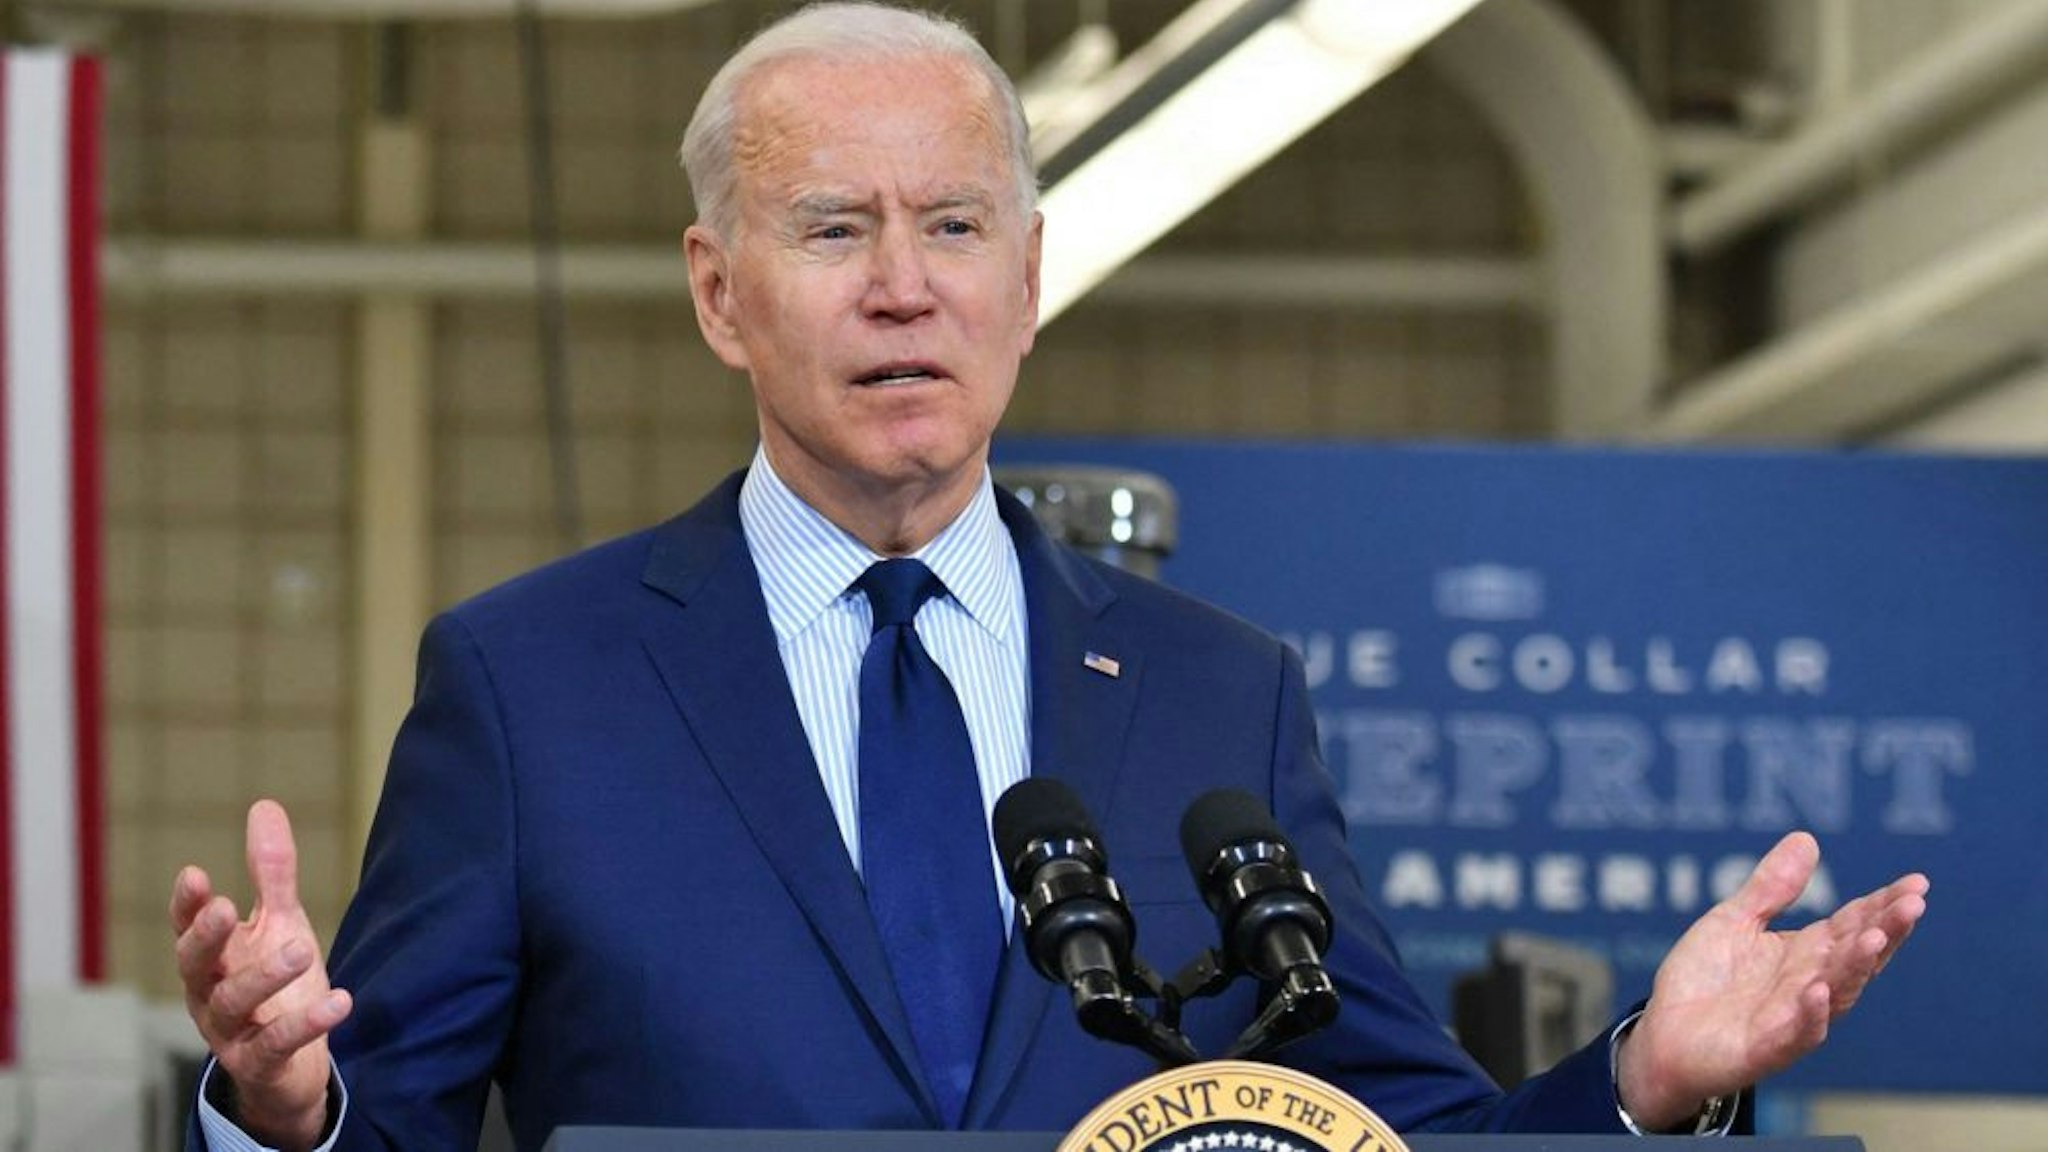 US President Joe Biden speaks on the economy at Cuyahoga Community College Manufacturing Technology Center, on May 27, 2021, in Cleveland, Ohio.